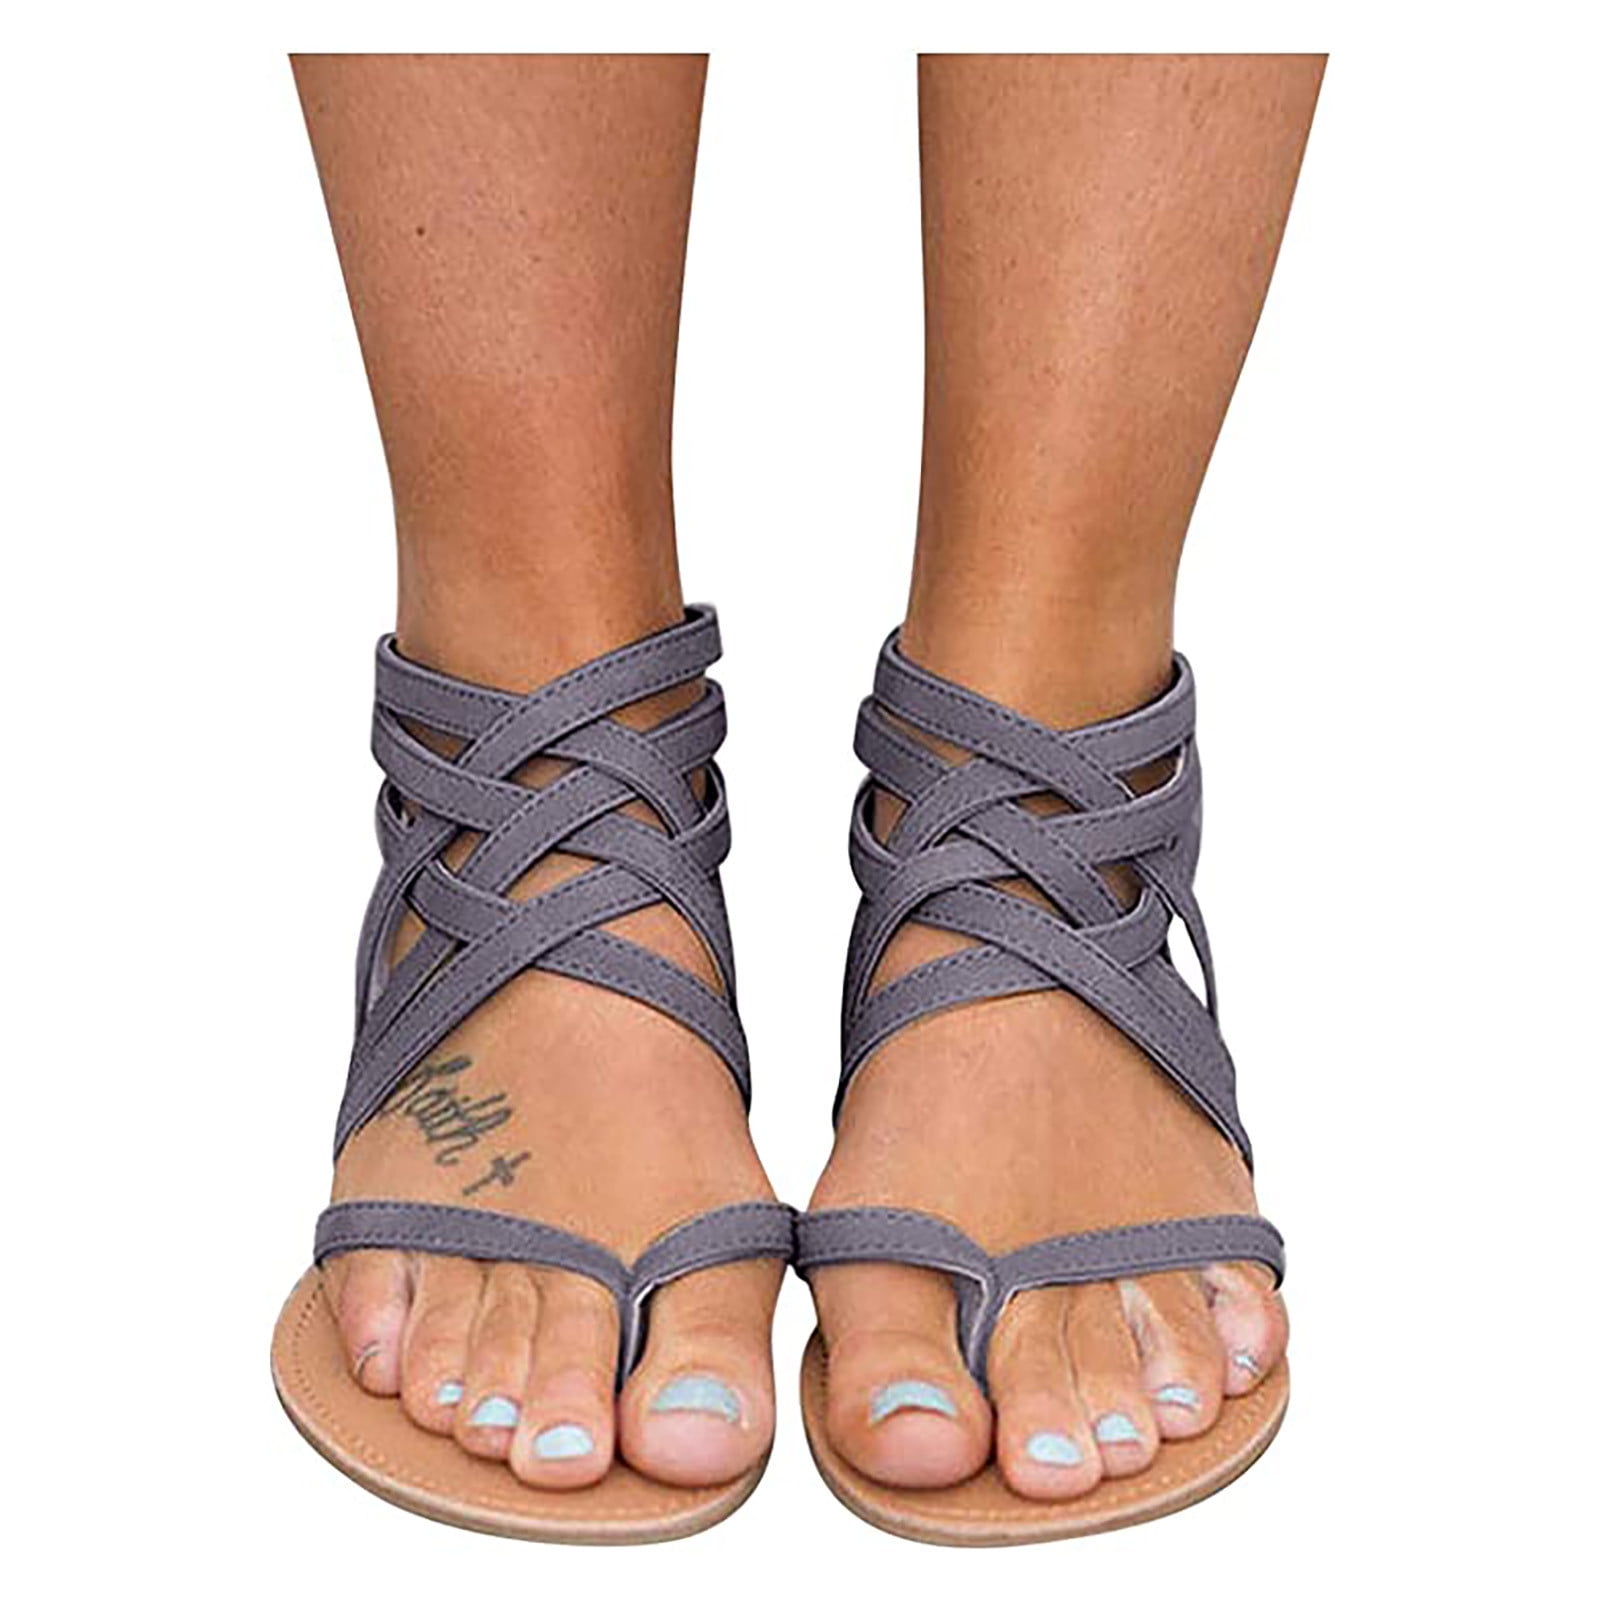 On Going--Love Slippers Suede Hollow Sandals Gladiator Shoes Women Casual Open Toe Slippers,Black,7